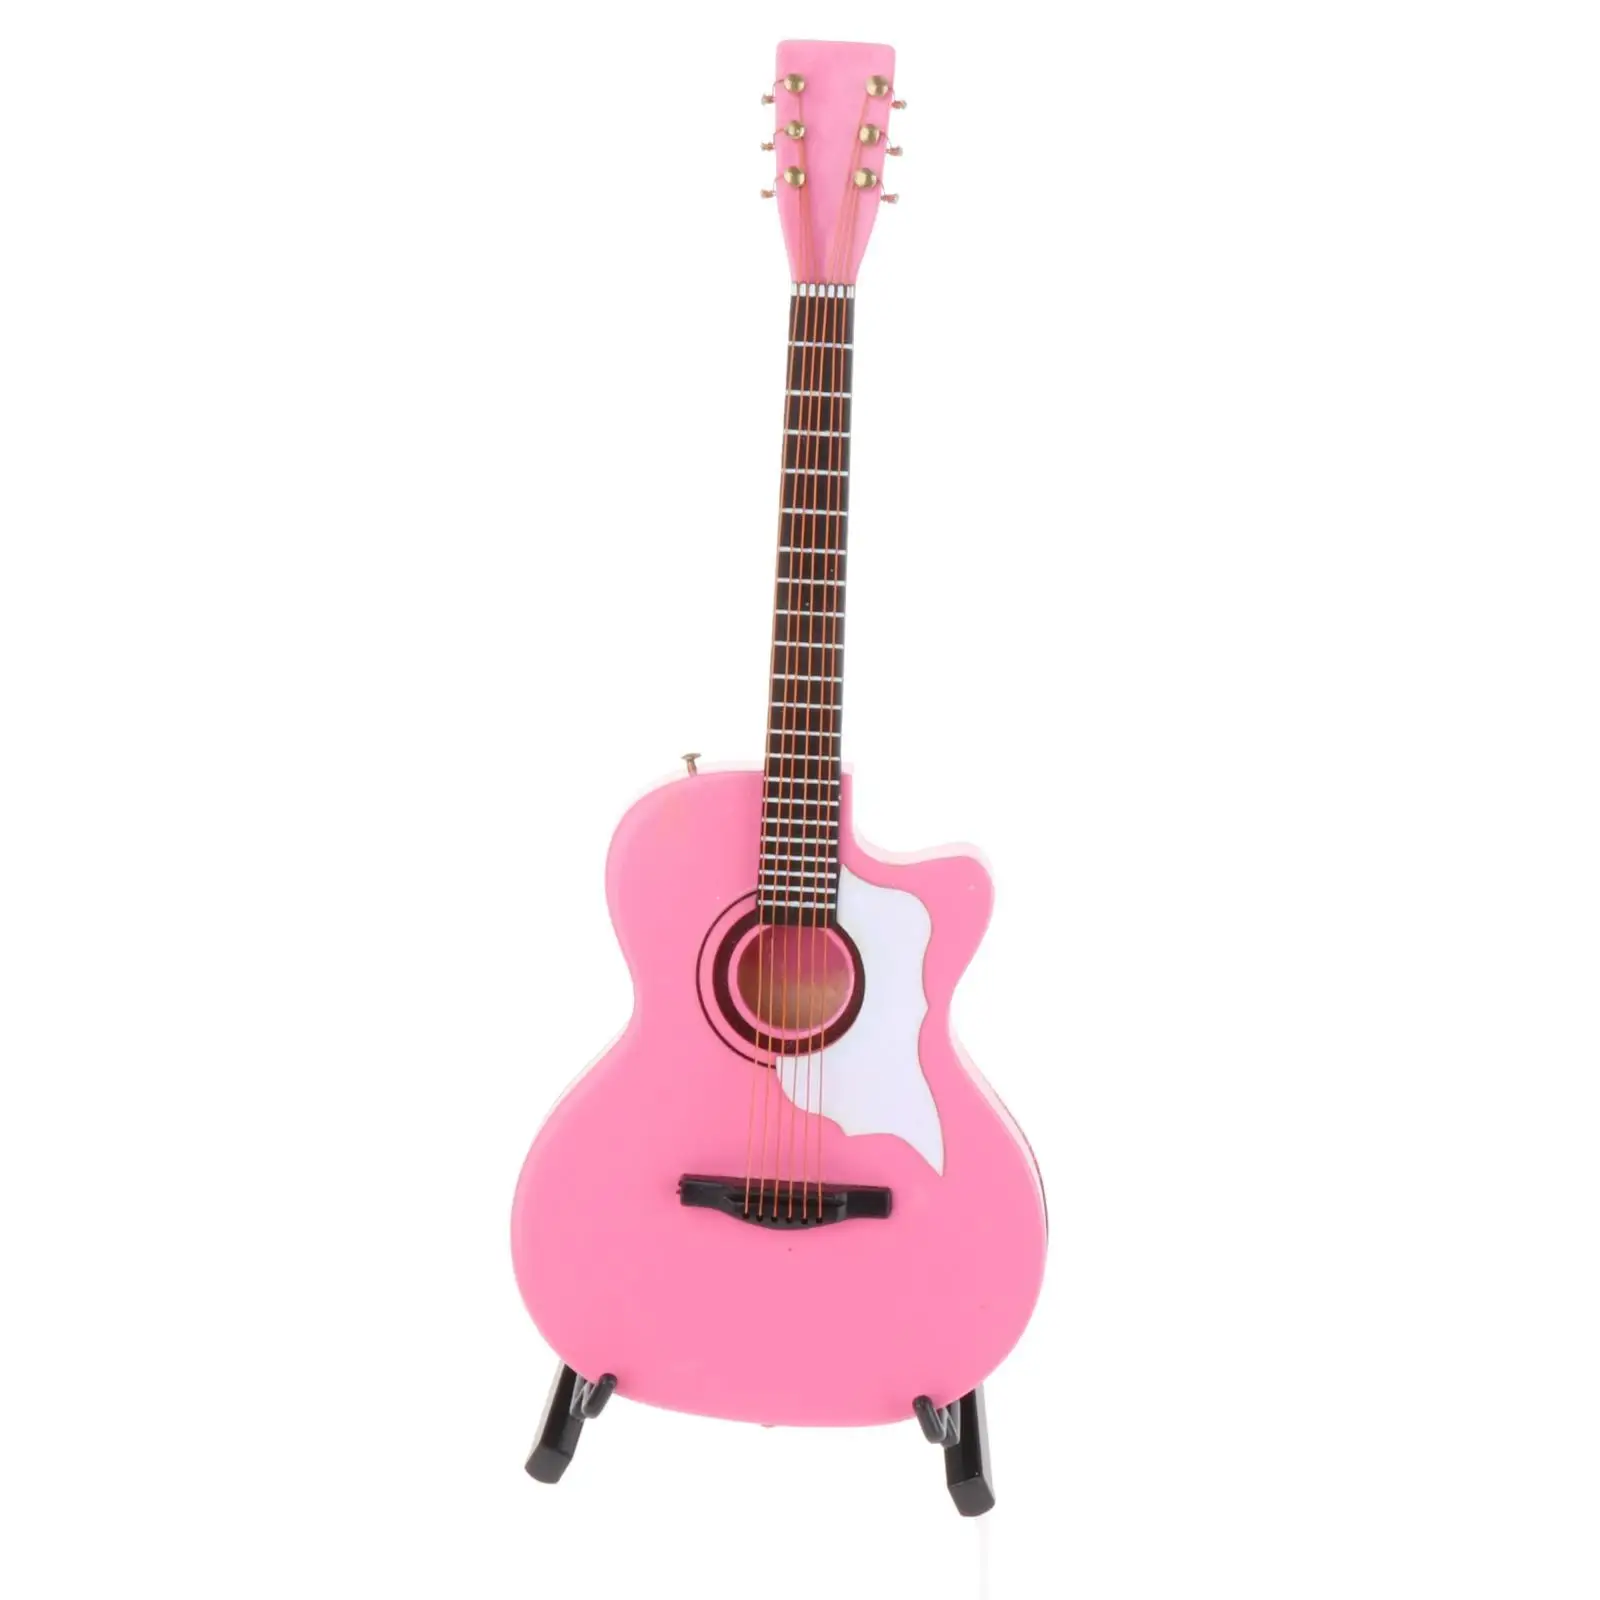 Simulation Classical Guitar Model Pink with Display Stand 1/6 Wooden Decoration Life Scene Supplies Scenery with Bracket